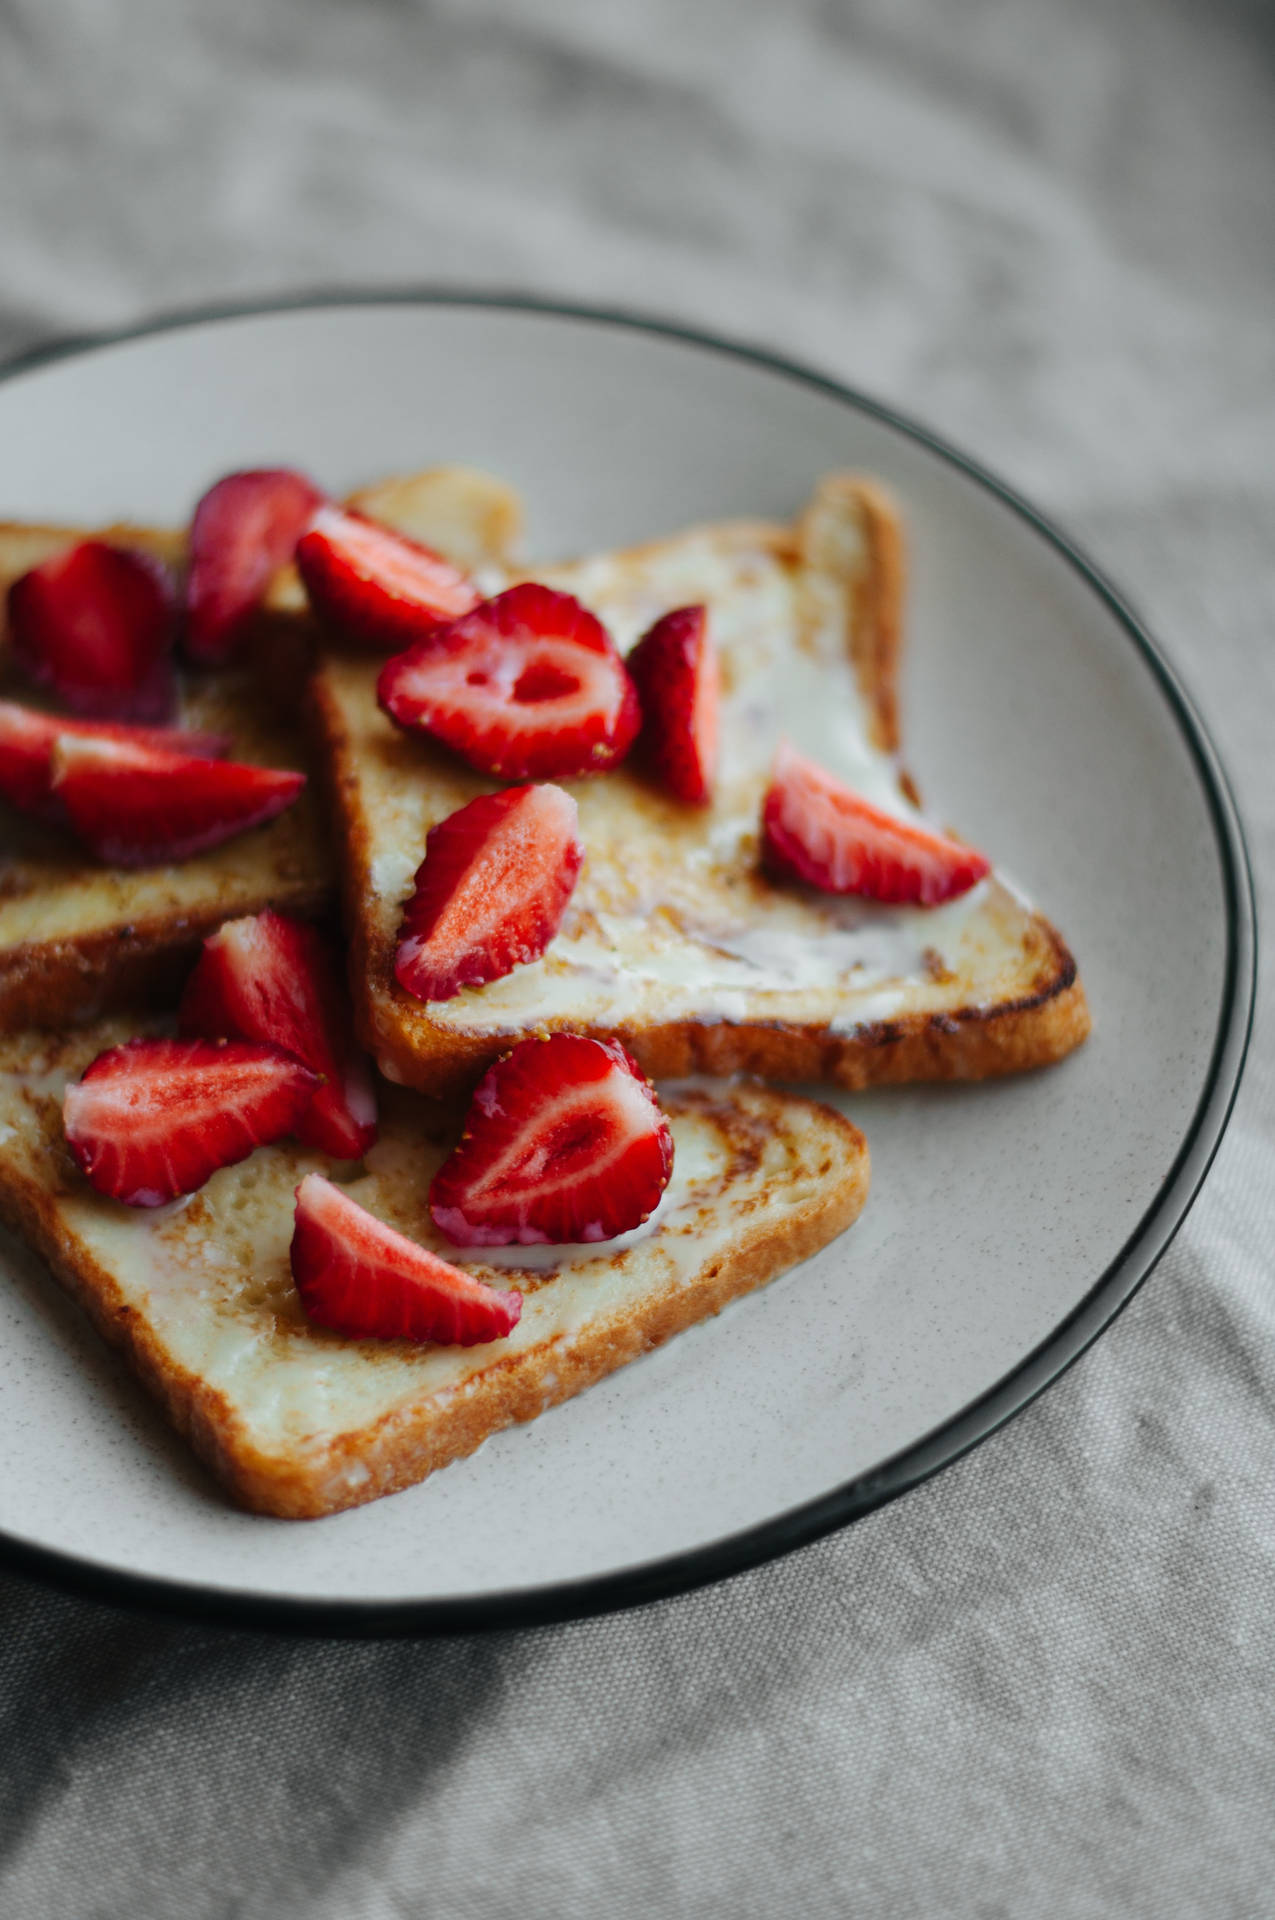 Delectable French Toast With Fresh Berries And Maple Syrup Background